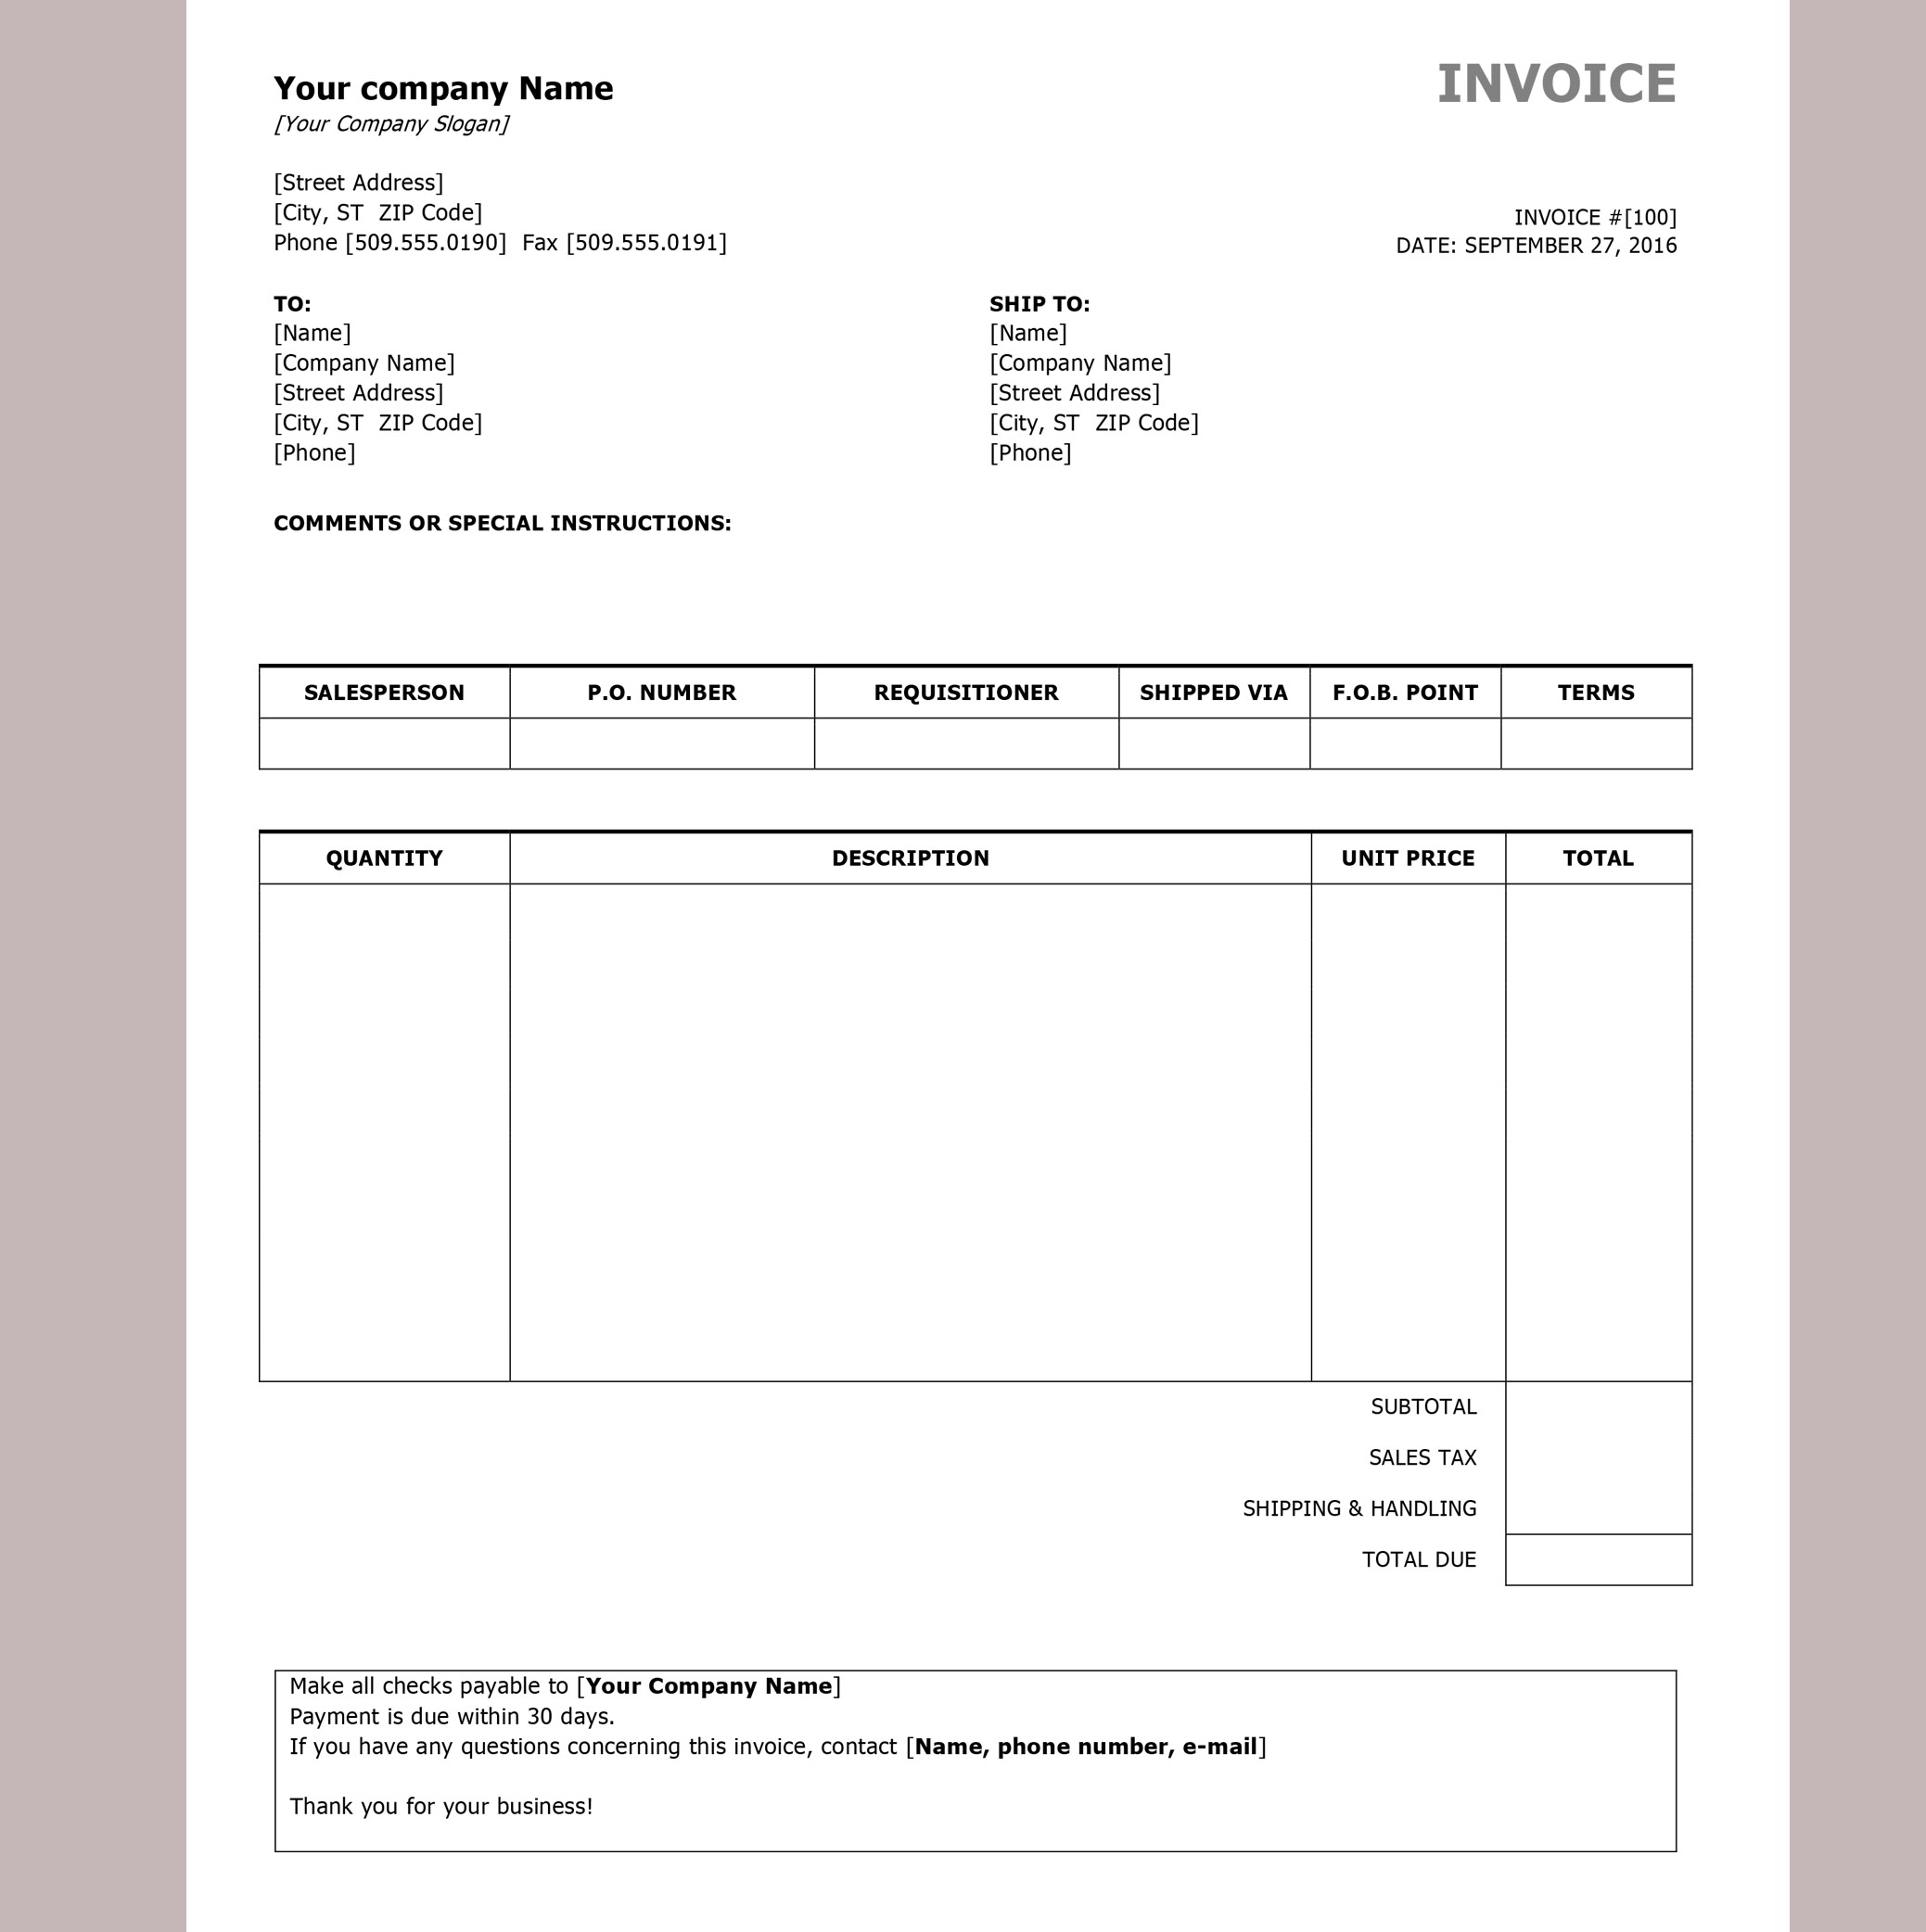 how to get invoice templats in word